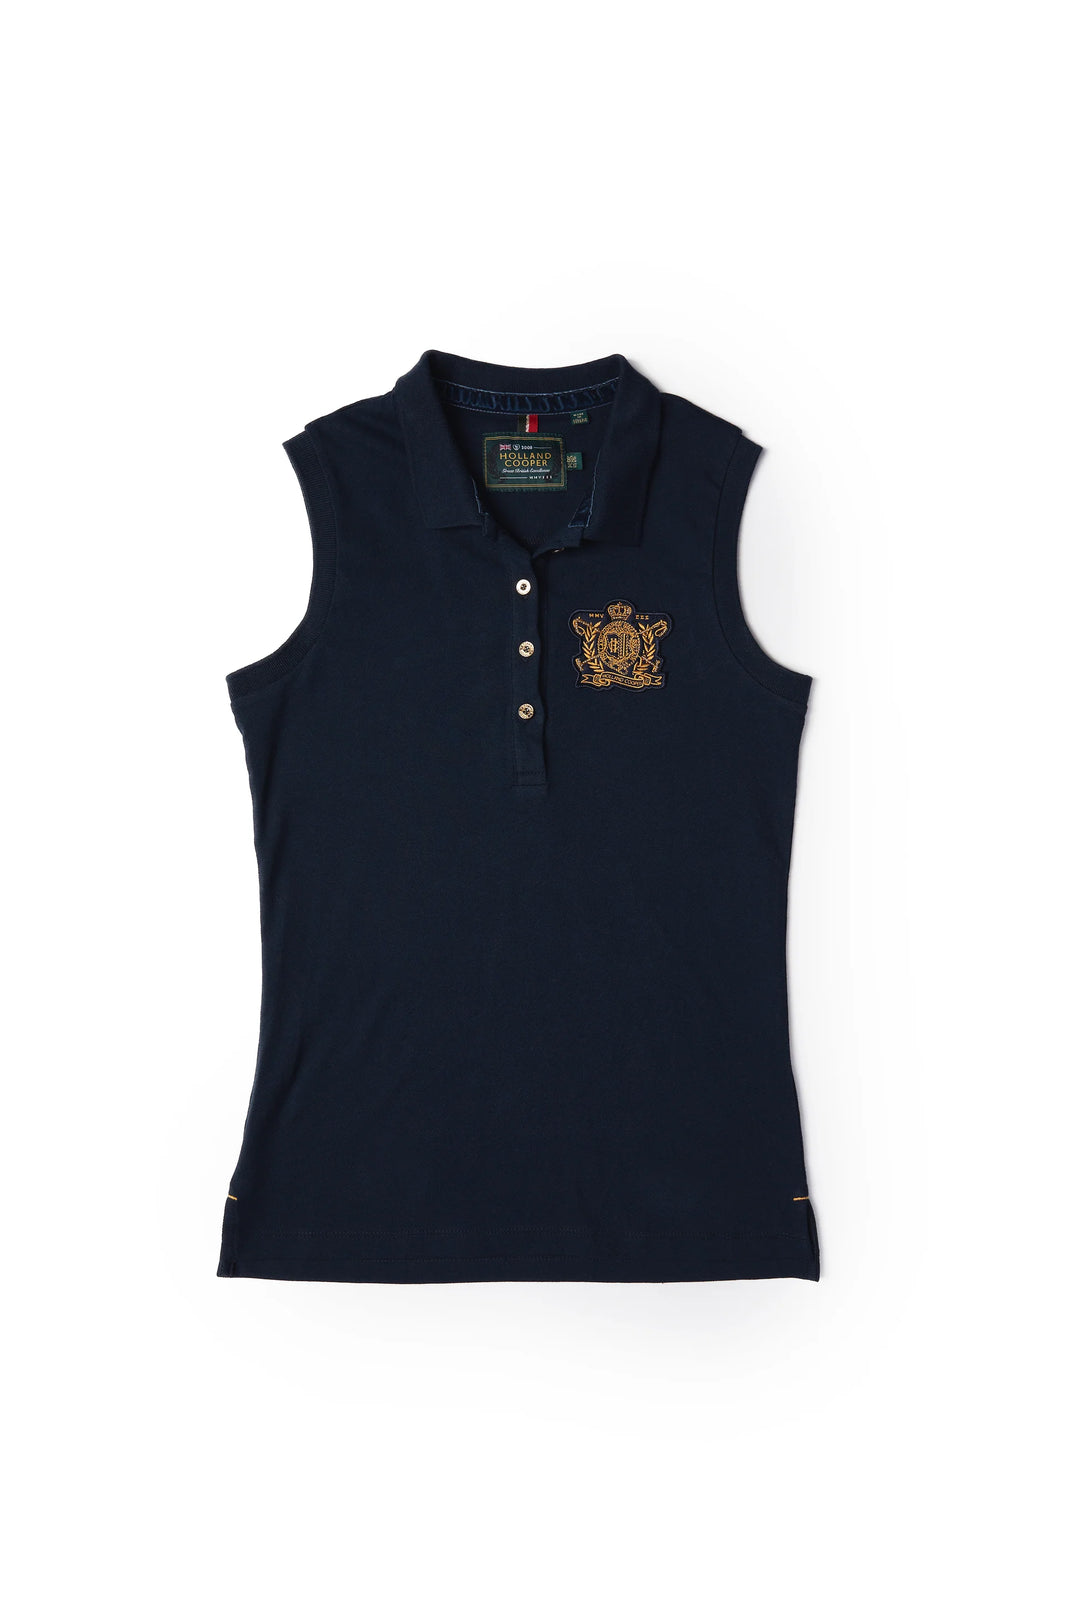 Holland Cooper Ladies Sleeveless Polo in Navy#Navy